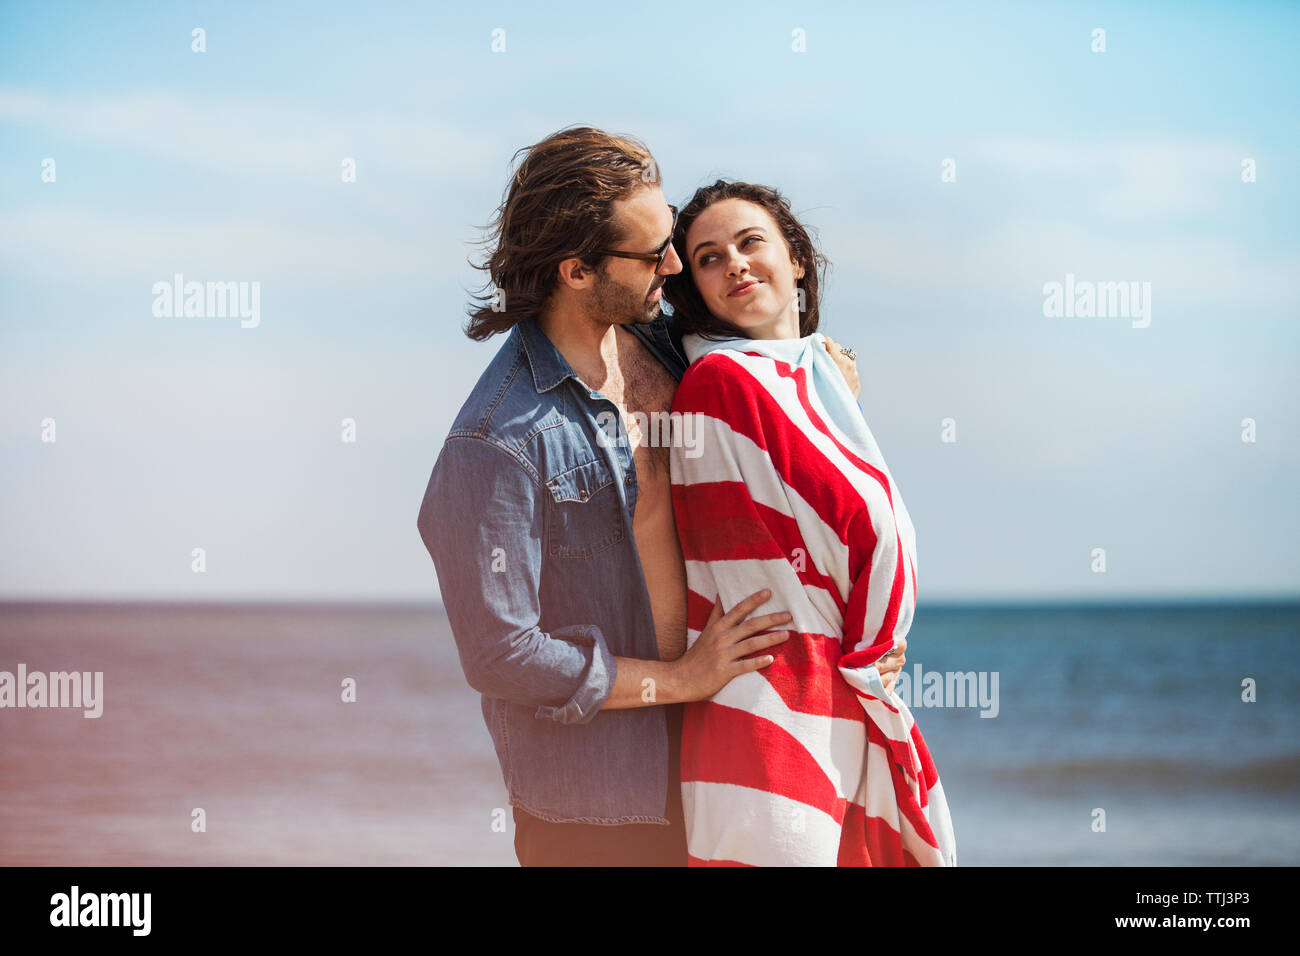 Side view of romantic man standing with woman wrapped in blanket at beach Stock Photo